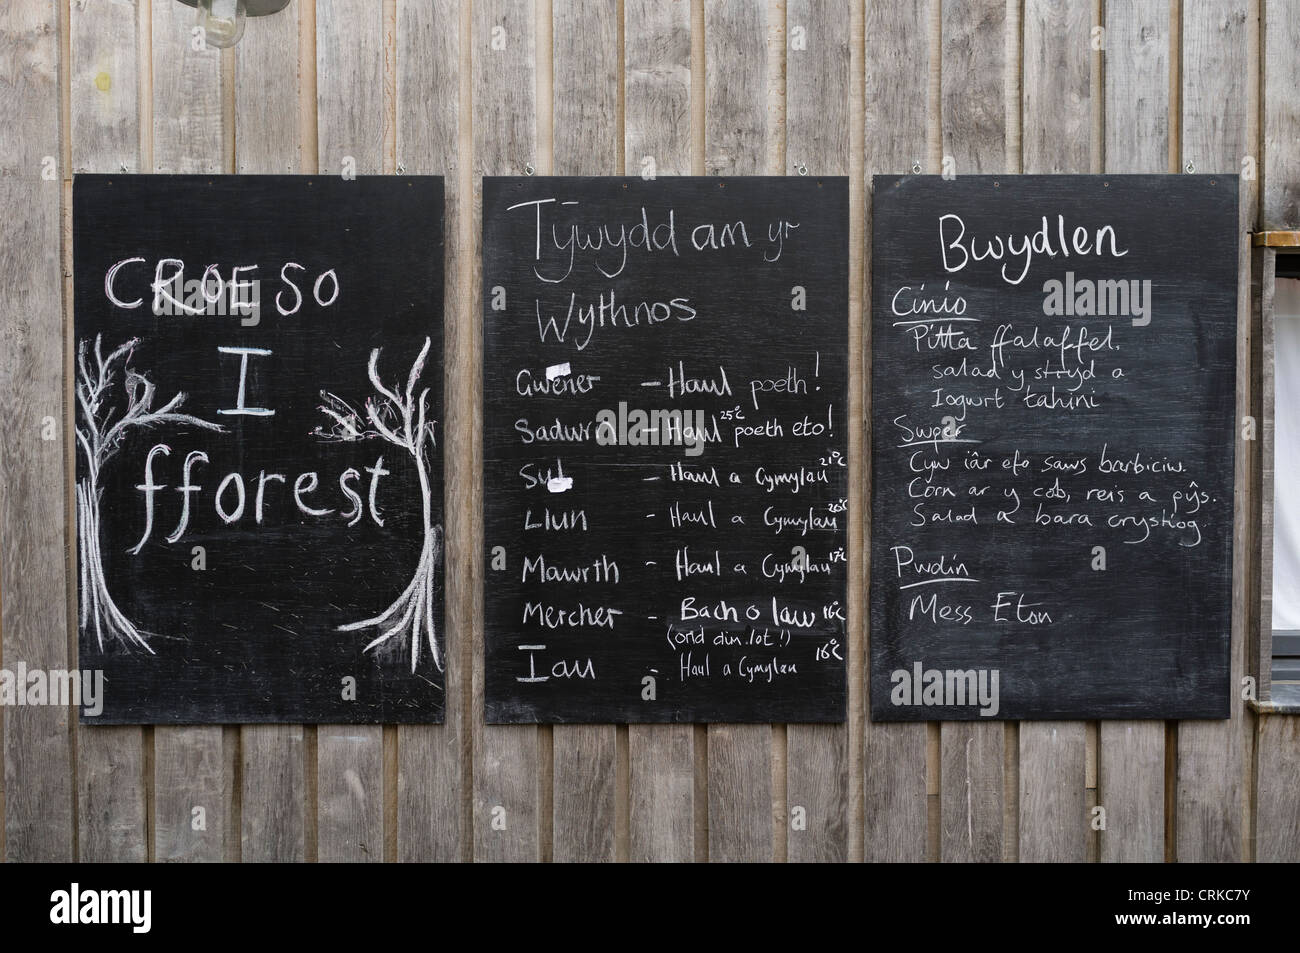 Bilingual welsh english notices on blackboard at Fforest outdoor adventure centre near Cardigan west Wales UK Stock Photo